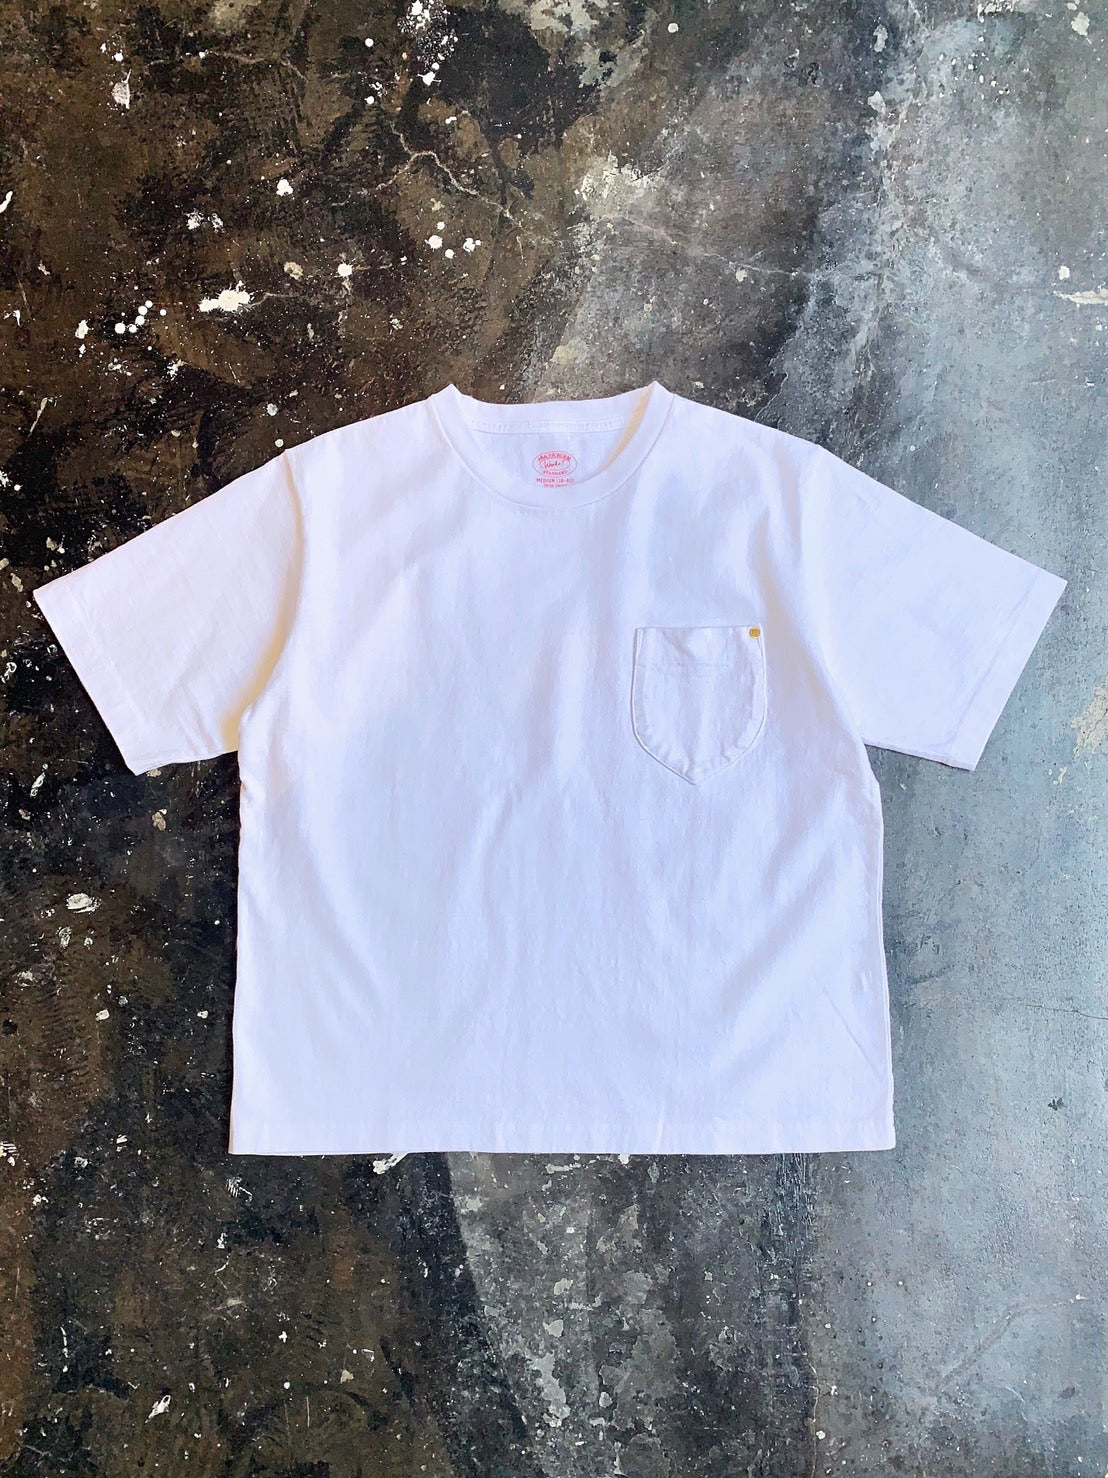 NM-TS03 STANDARD HEAVY WEIGHT S/S T-S WHITE